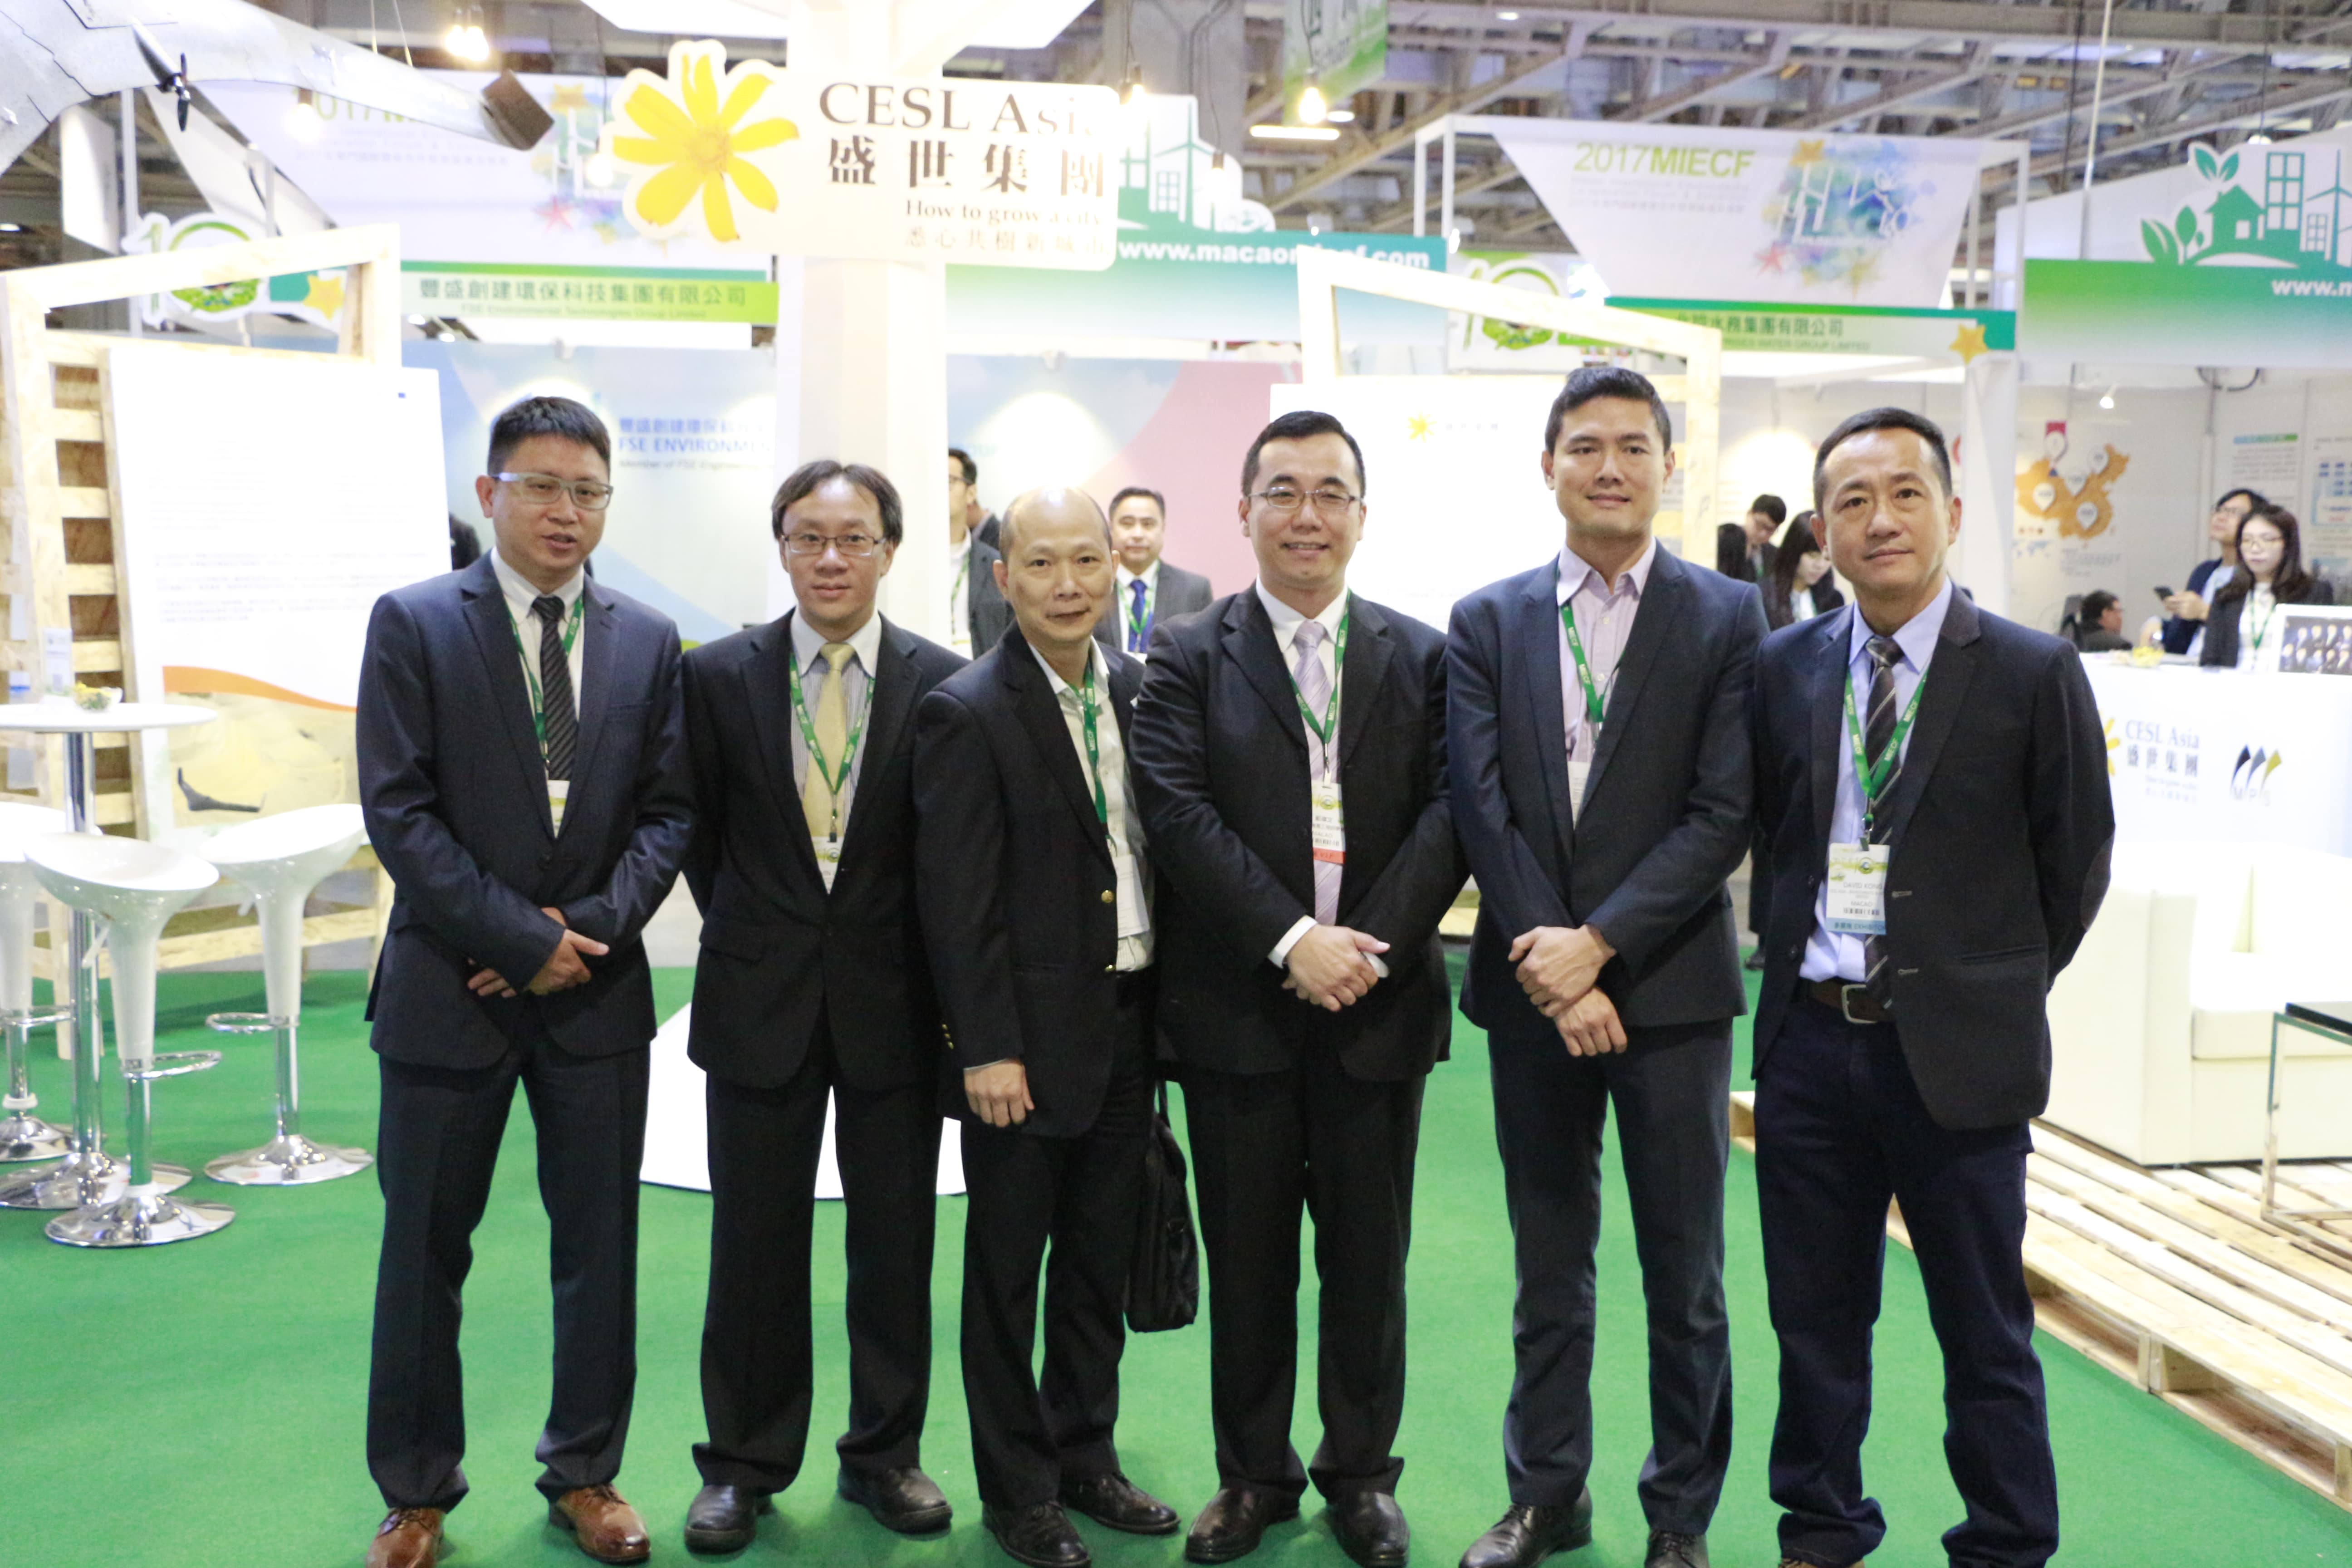 CESL Asia showcases its investments in the context of OBOR and the Macau Platform as well as its collaboration with Spin.Works, an aerospace company from Portugal dedicated to the development and manufacturing of defense, space and unmanned system